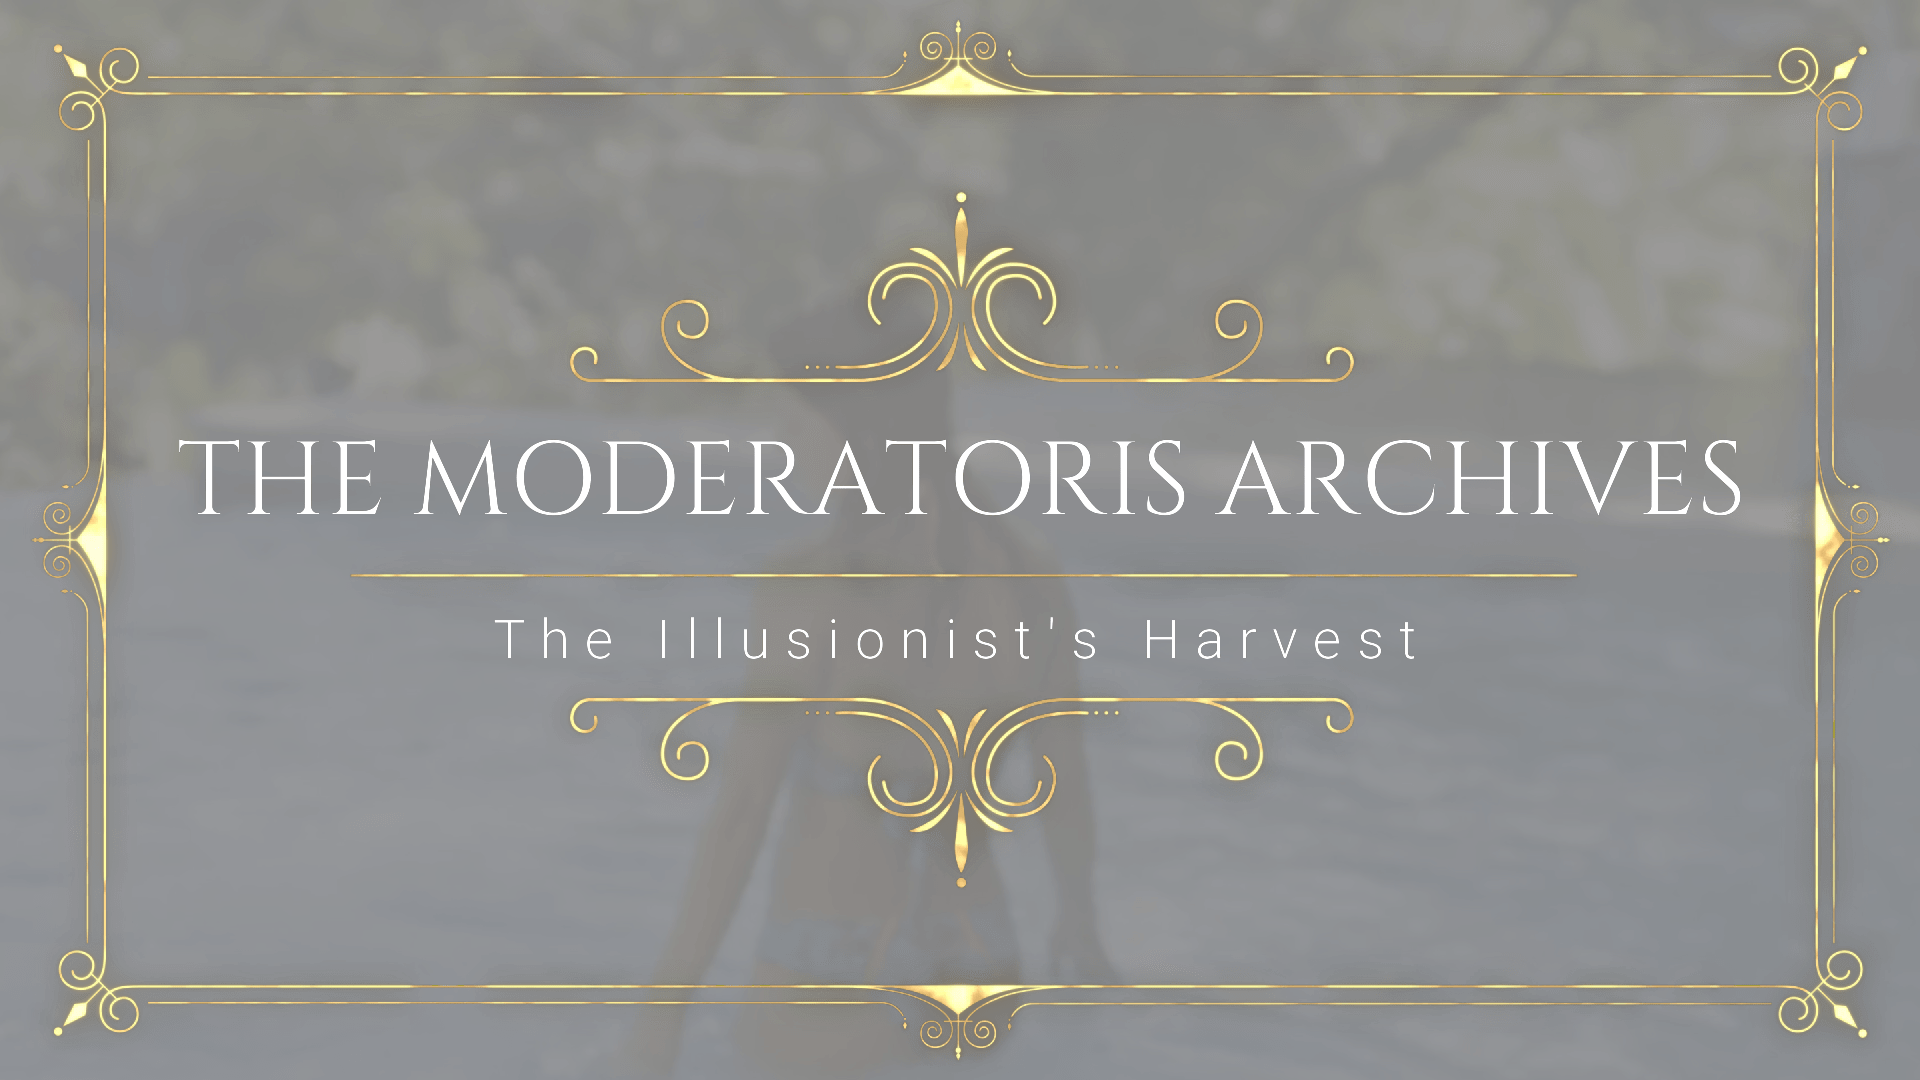 The Moderatoris Archives - The Illusionist's Harvest (Poster ml).png